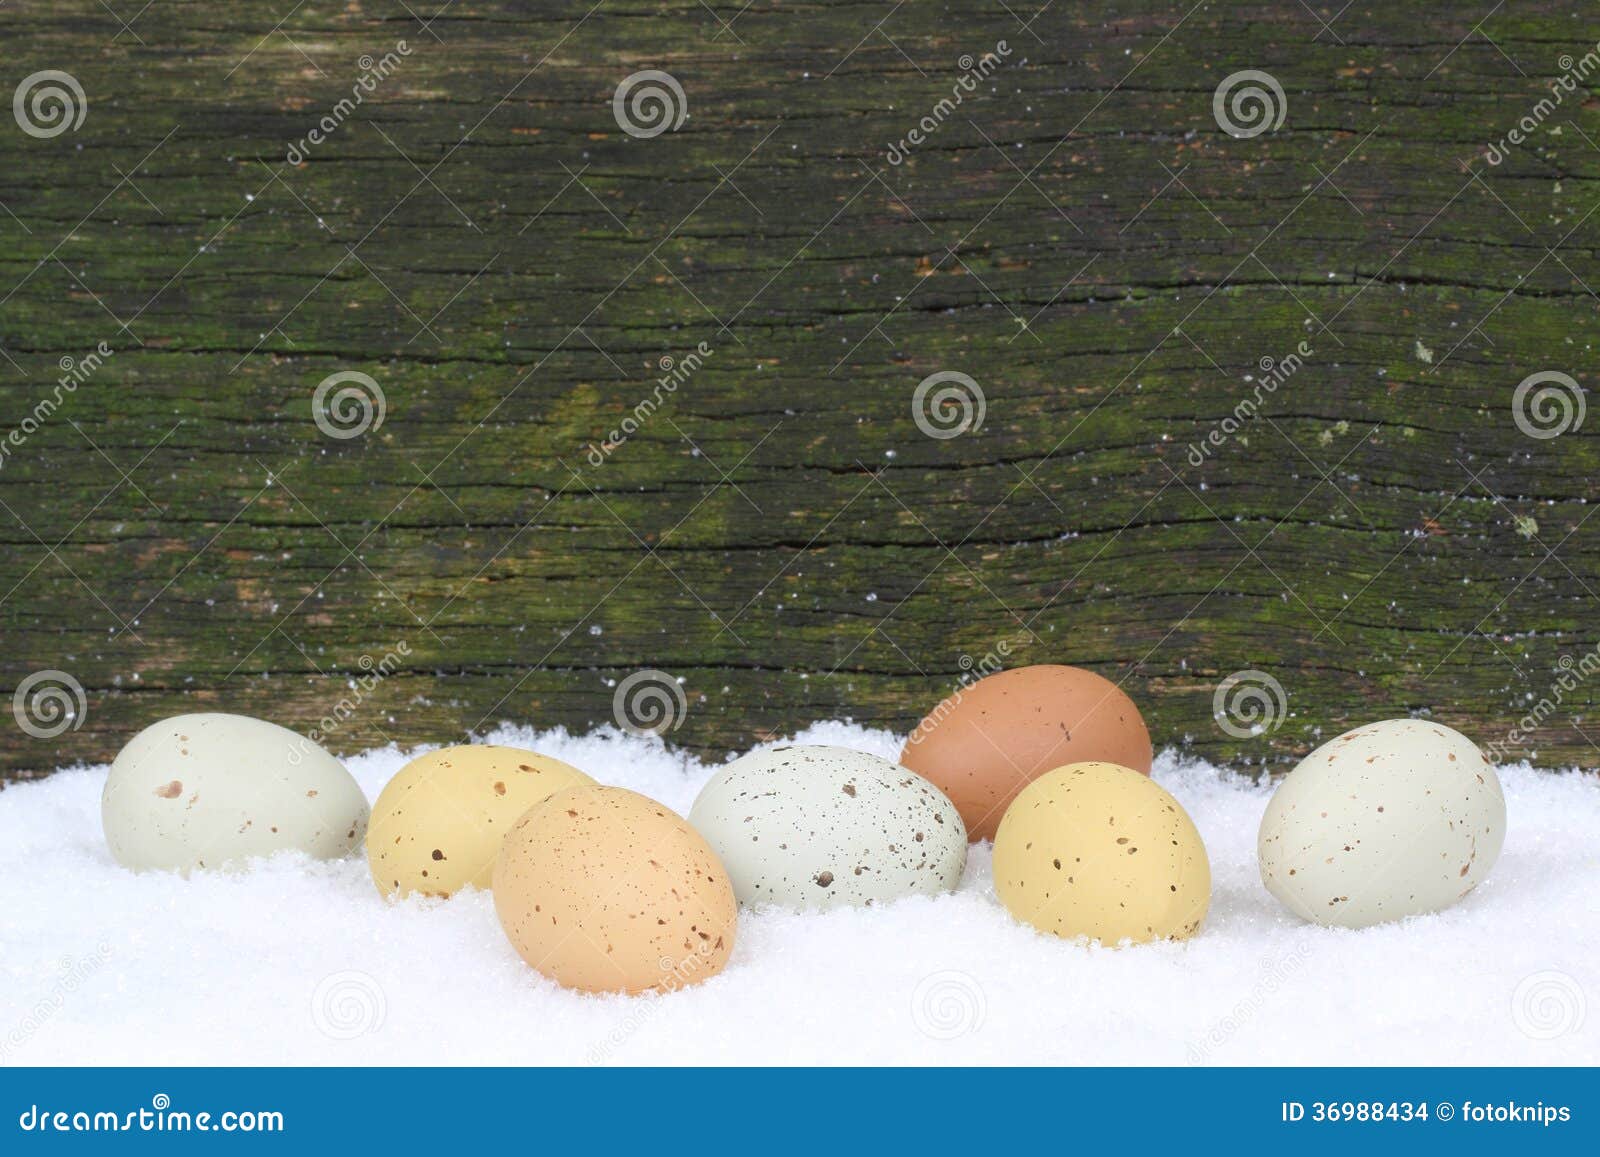 Easter eggs in the snow in front of wood.